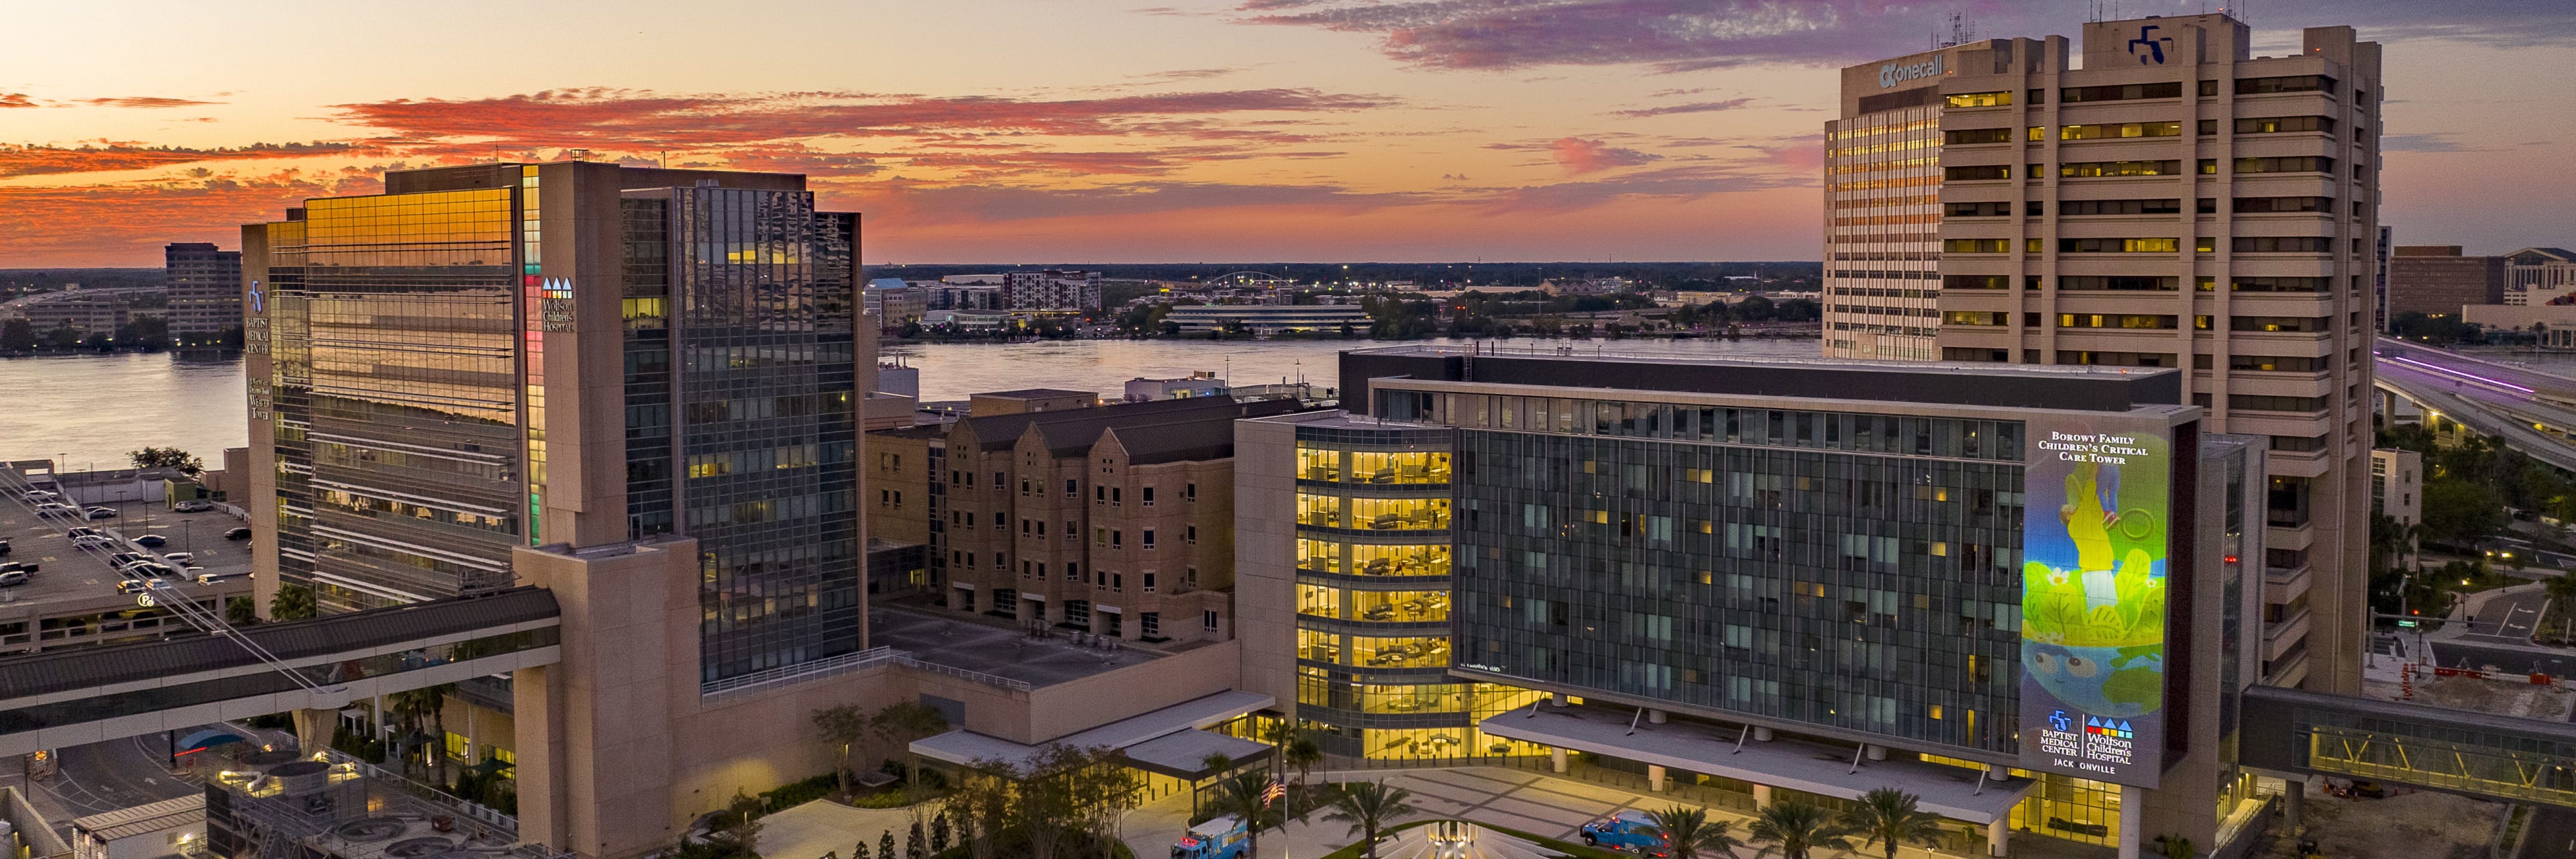 An aerial view of the Baptist Health and Wolfson Children's downtown Jacksonville campus at sunset.